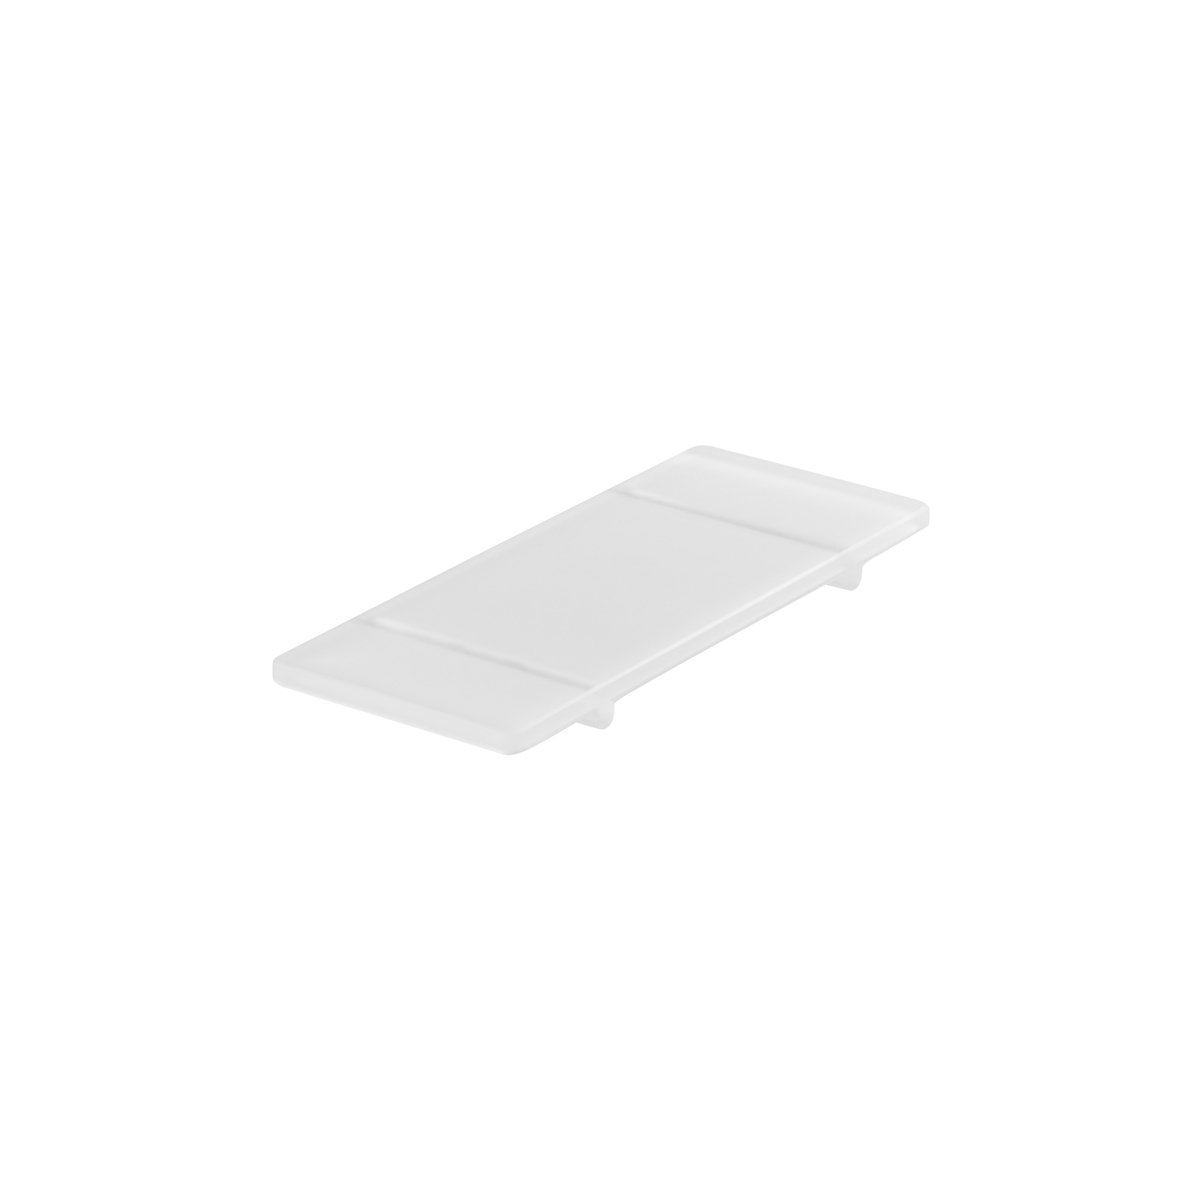 MLP111057 Mealplak Footed Tray Anthracite 330x150x15mm Tomkin Australia Hospitality Supplies